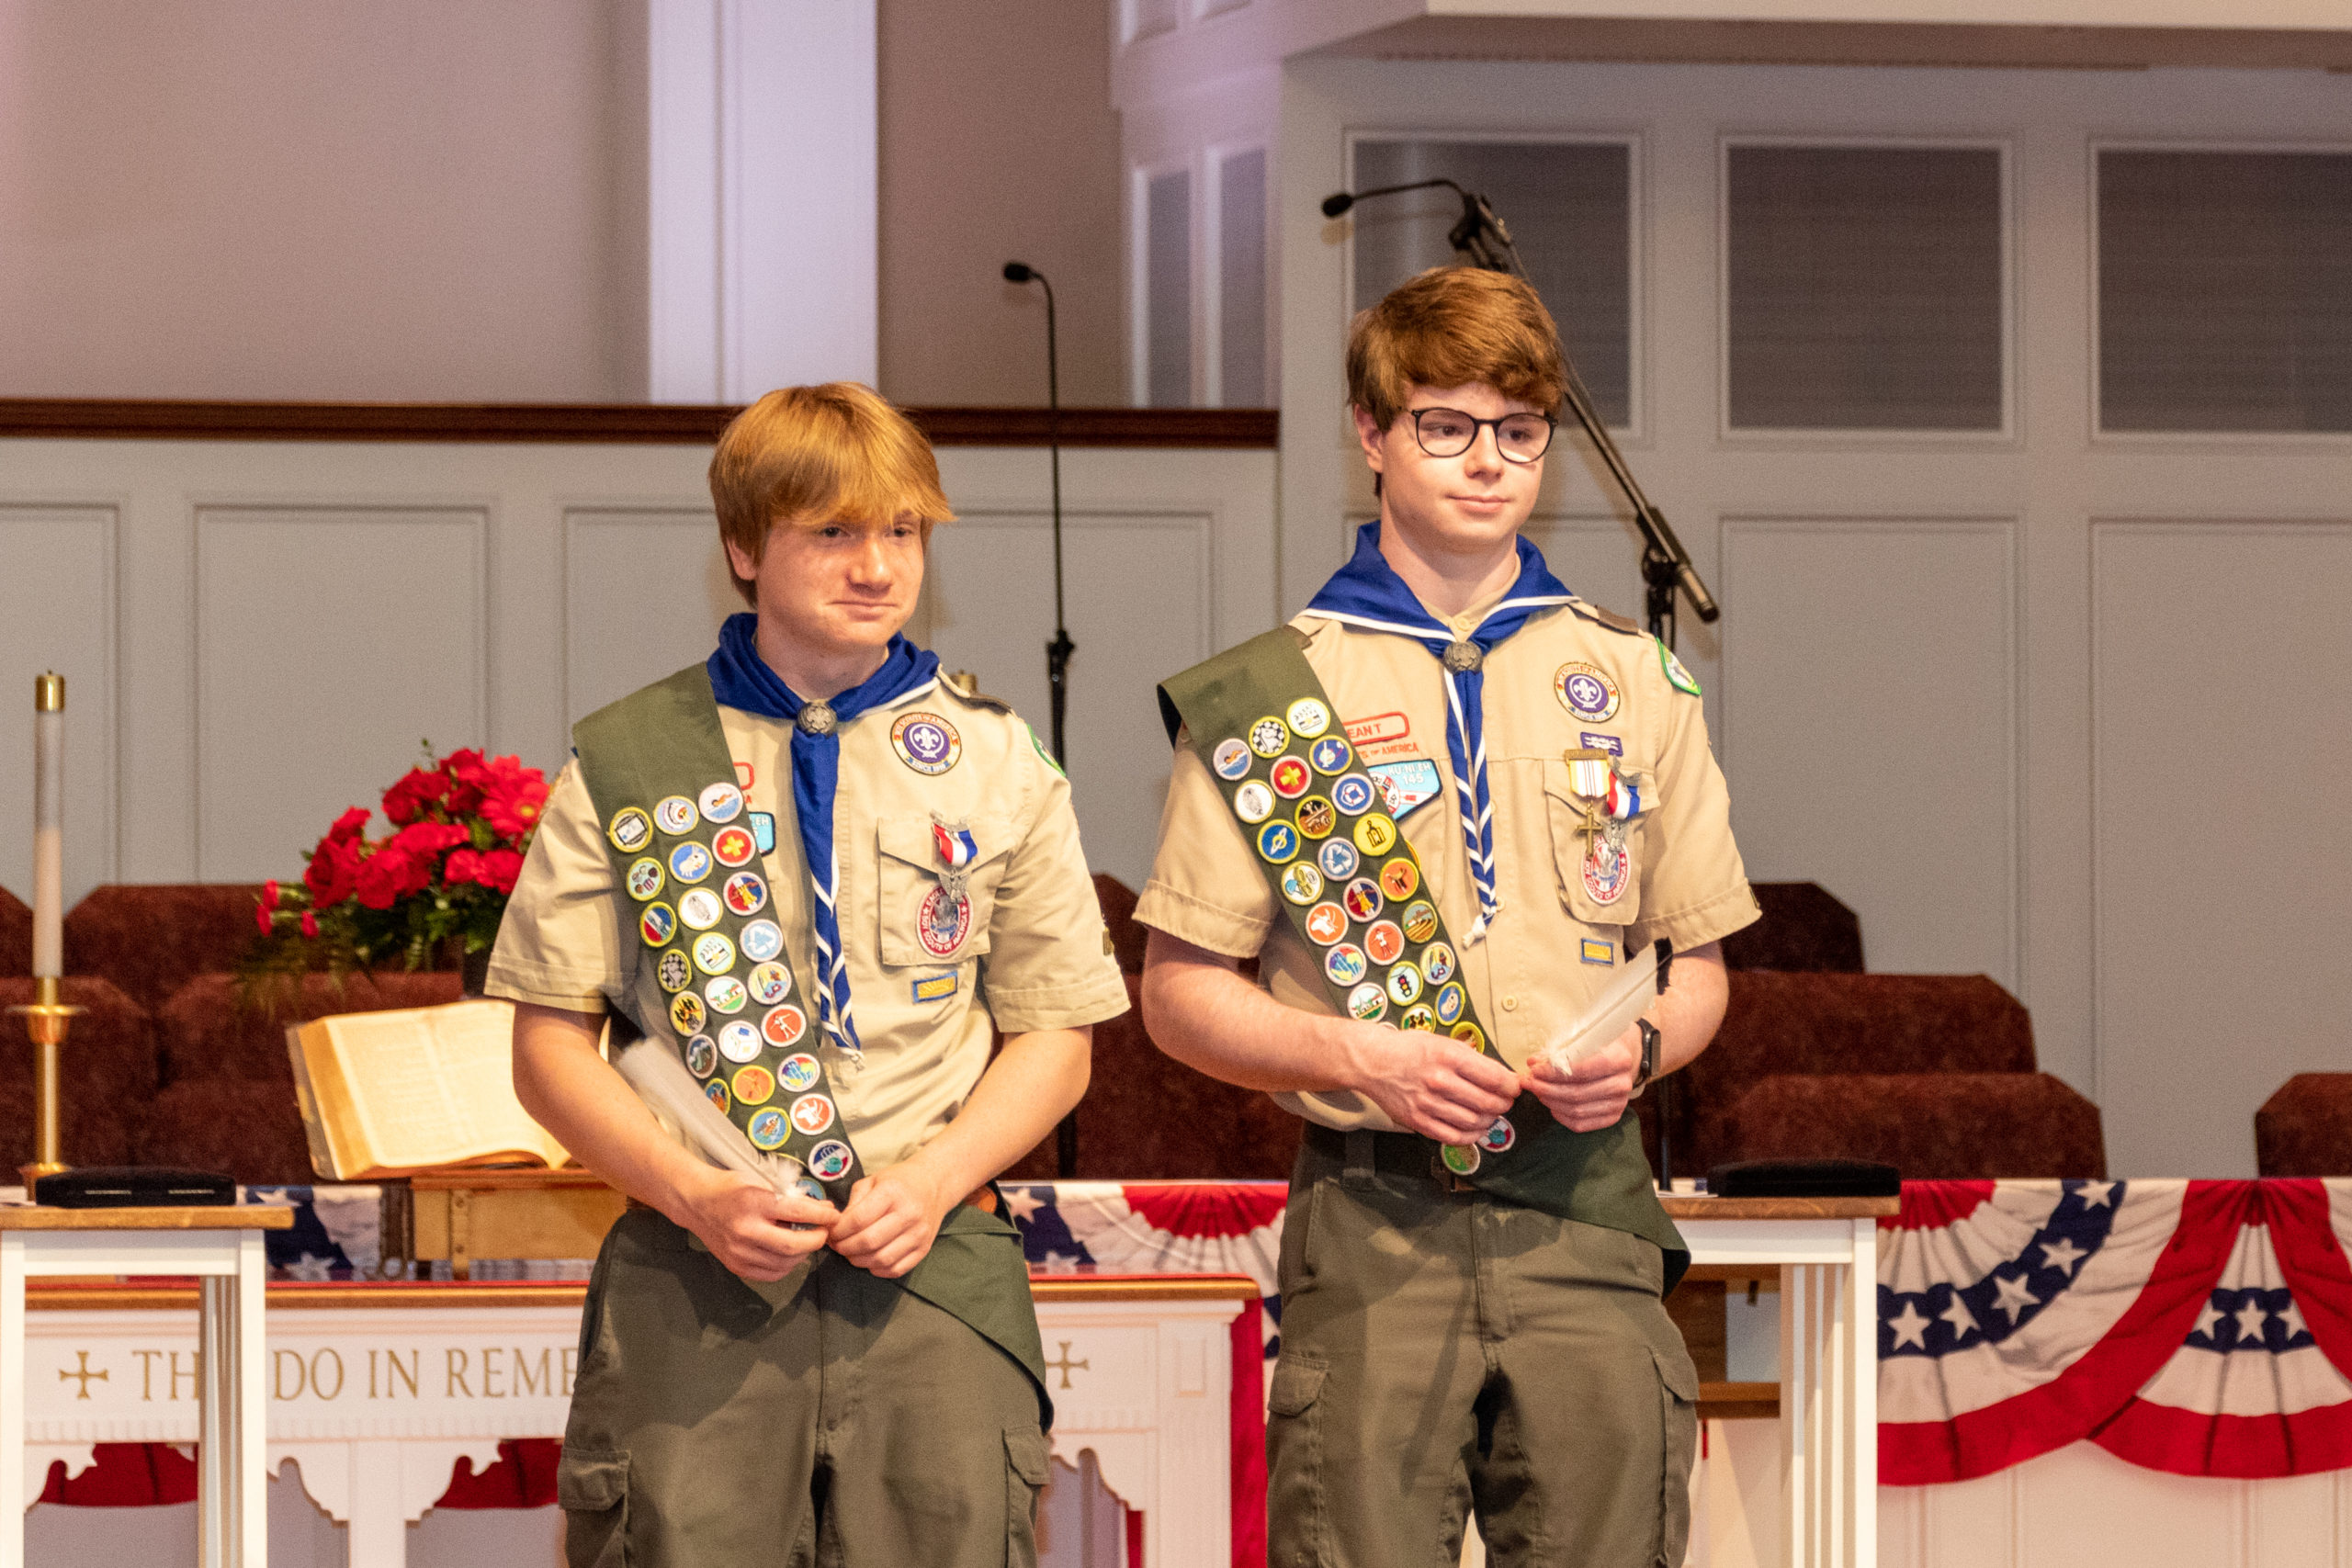 Jacksonville girl, 7, first to join area Boy Scout pack